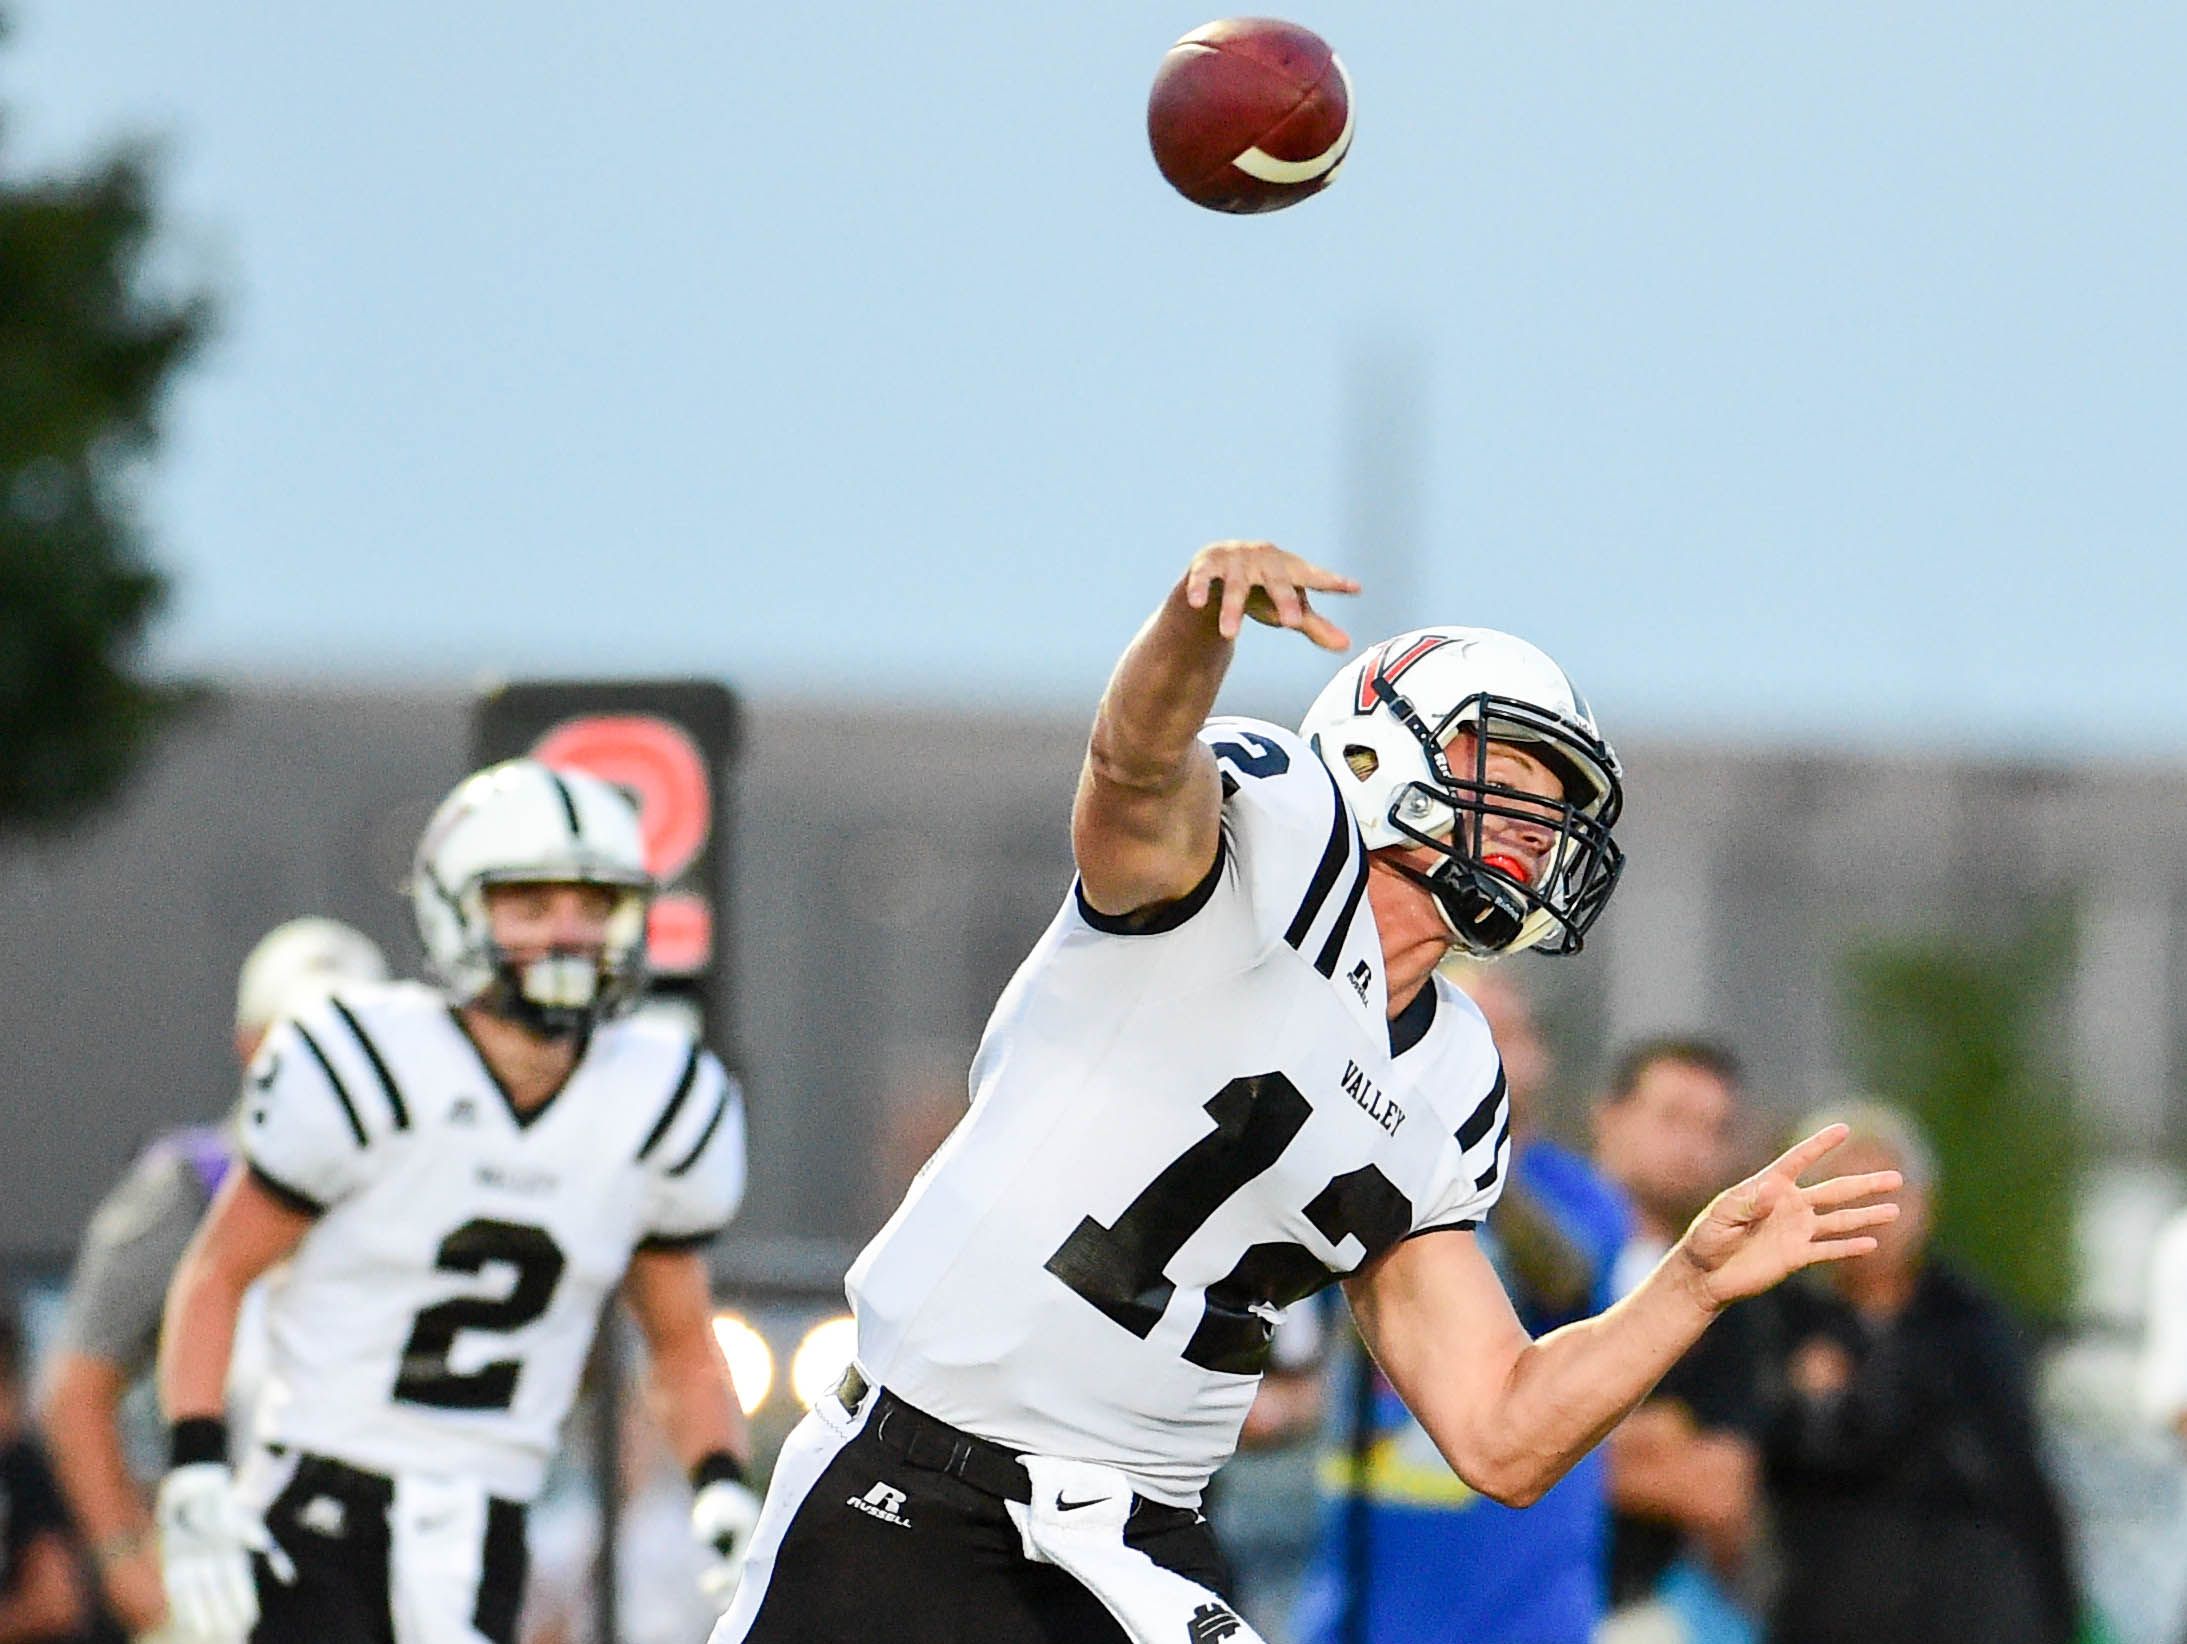 Valley quarterback Rocky Lombardi throw a pass downfield on Sept. 2 against Waukee.